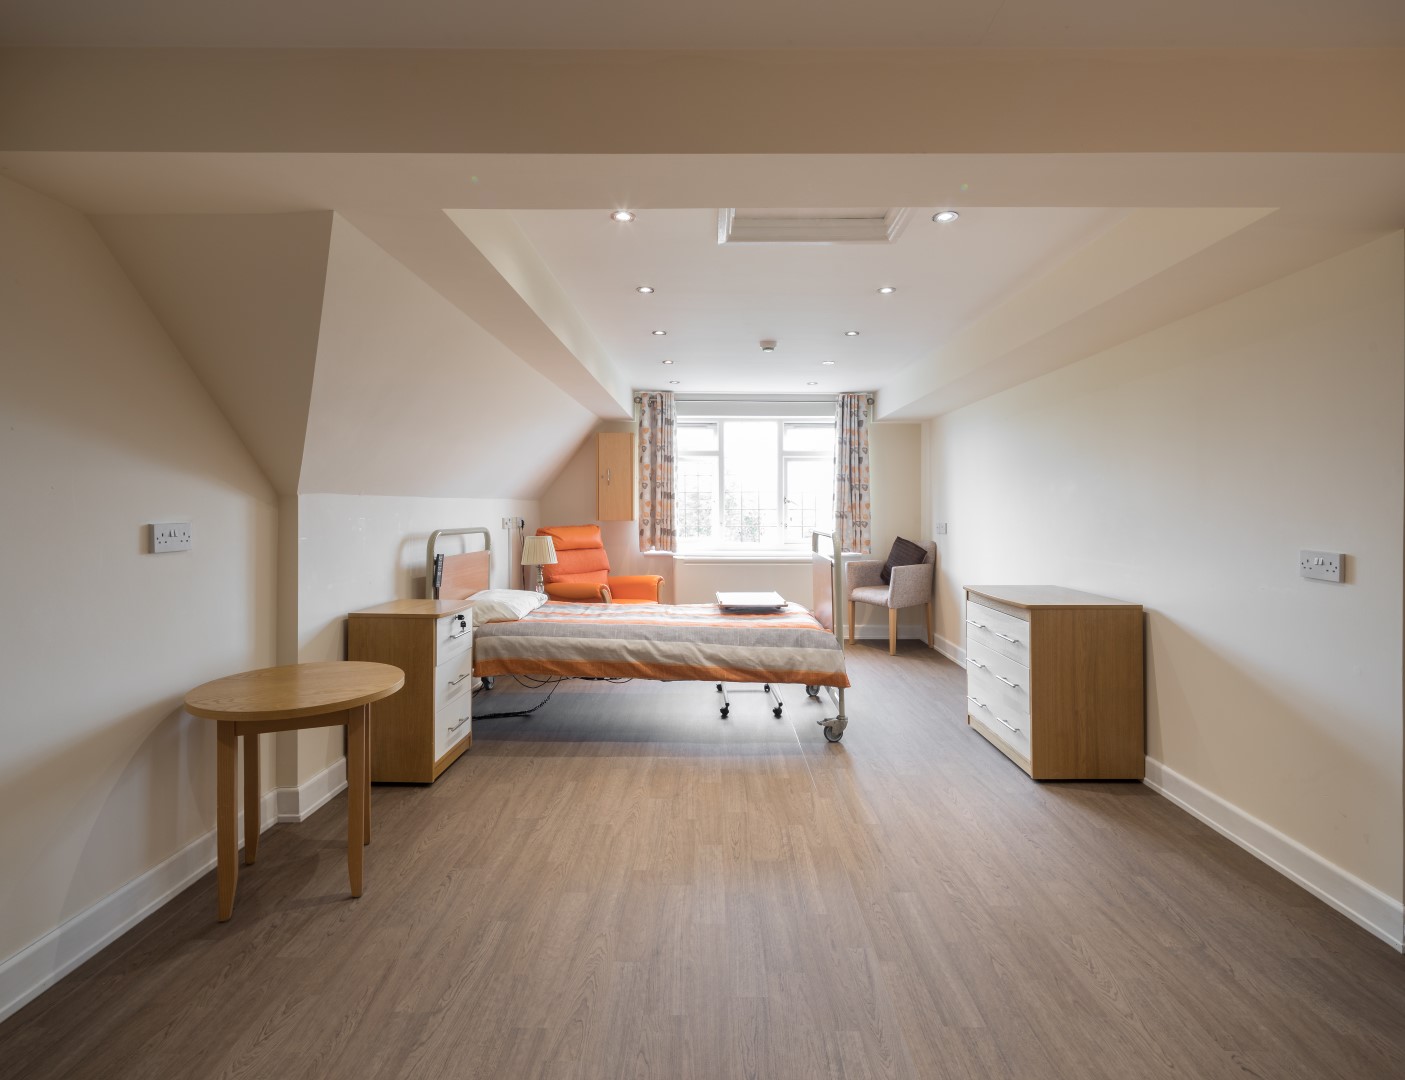 Altro Wood Adhesive Free Flooring Specified For Nursing Home Labm